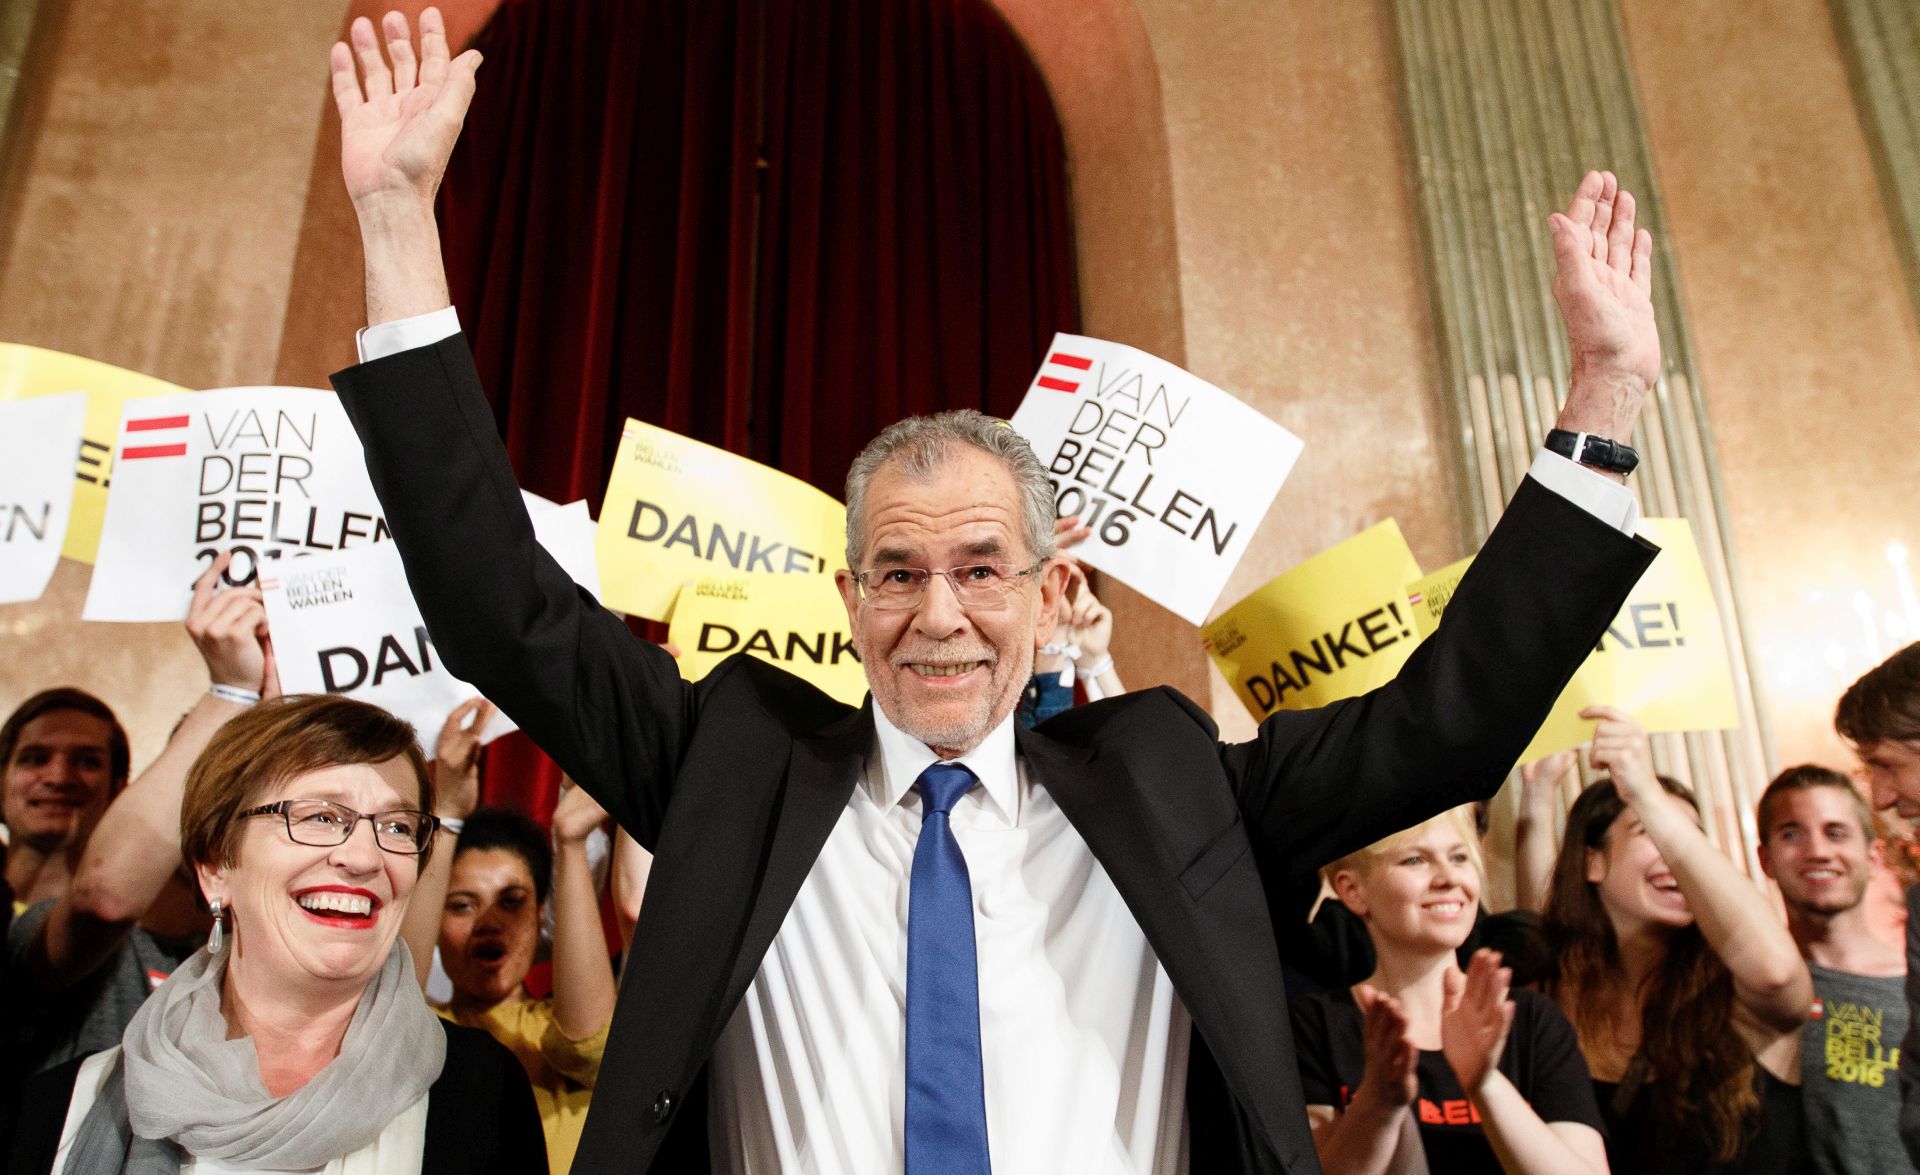 epa05324058 Presidential candidate Alexander Van der Bellen (C), supported by the Green Party, waves to supporters as he celebrates at the Palais Auersperg after the Austrian presidential elections run off in Vienna, Austria, 22 May 2016.  EPA/FLORIAN WIESER